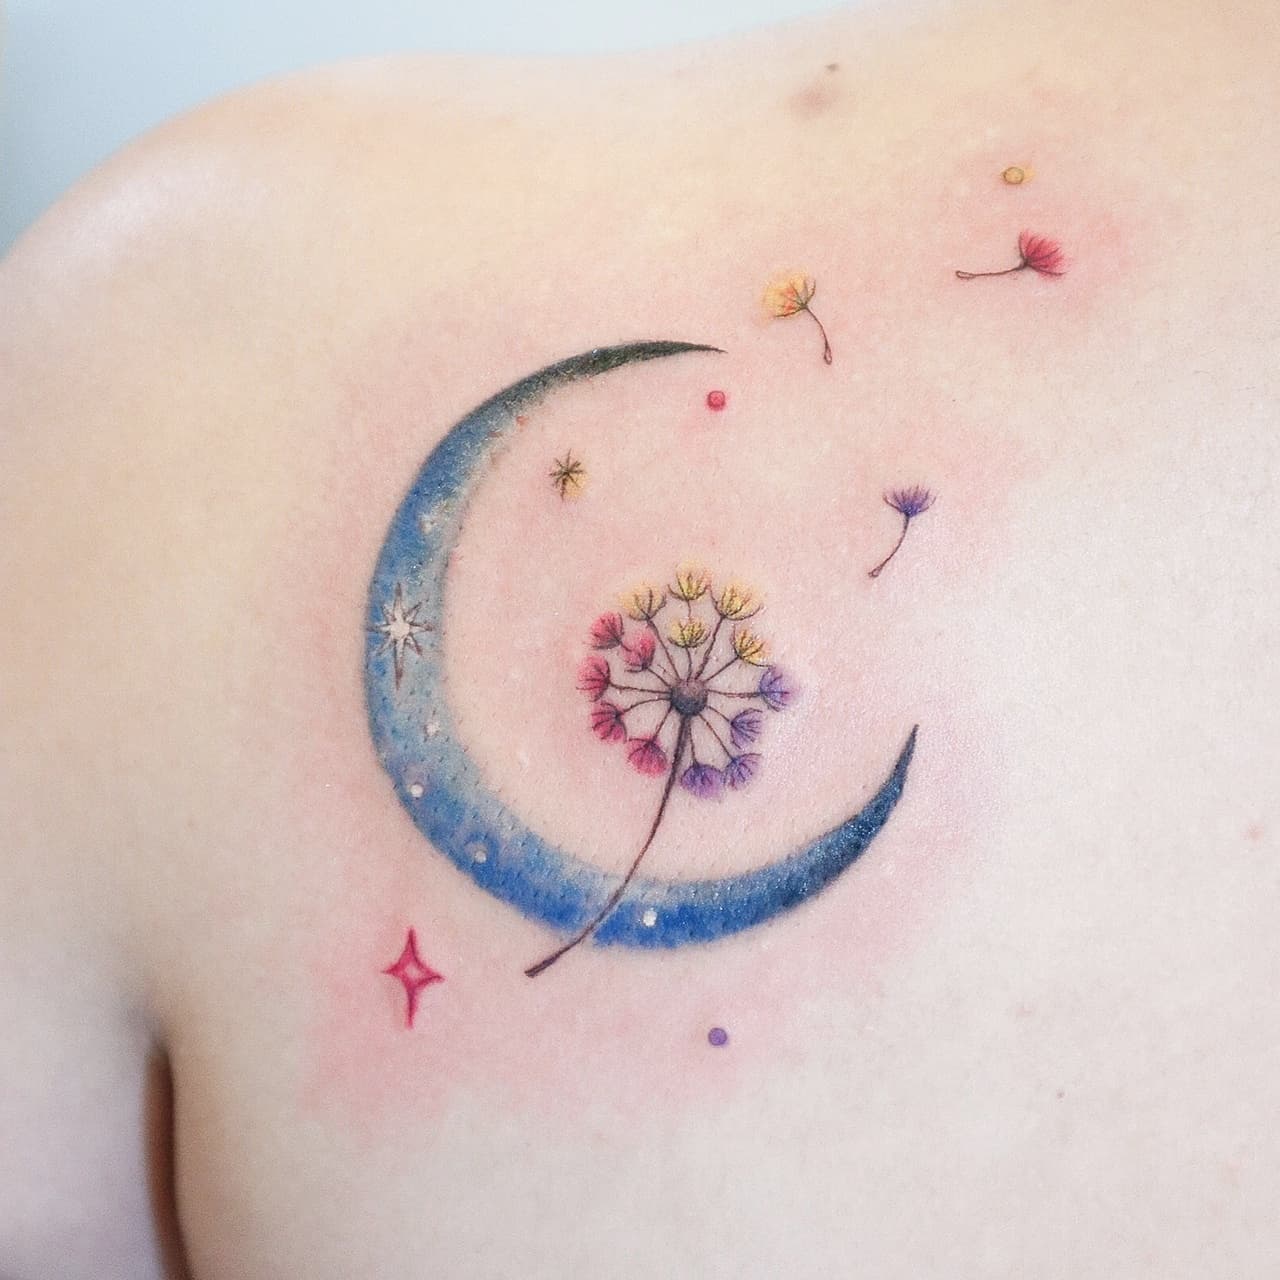 Watercolor style tattoo of a dandelion flower on the